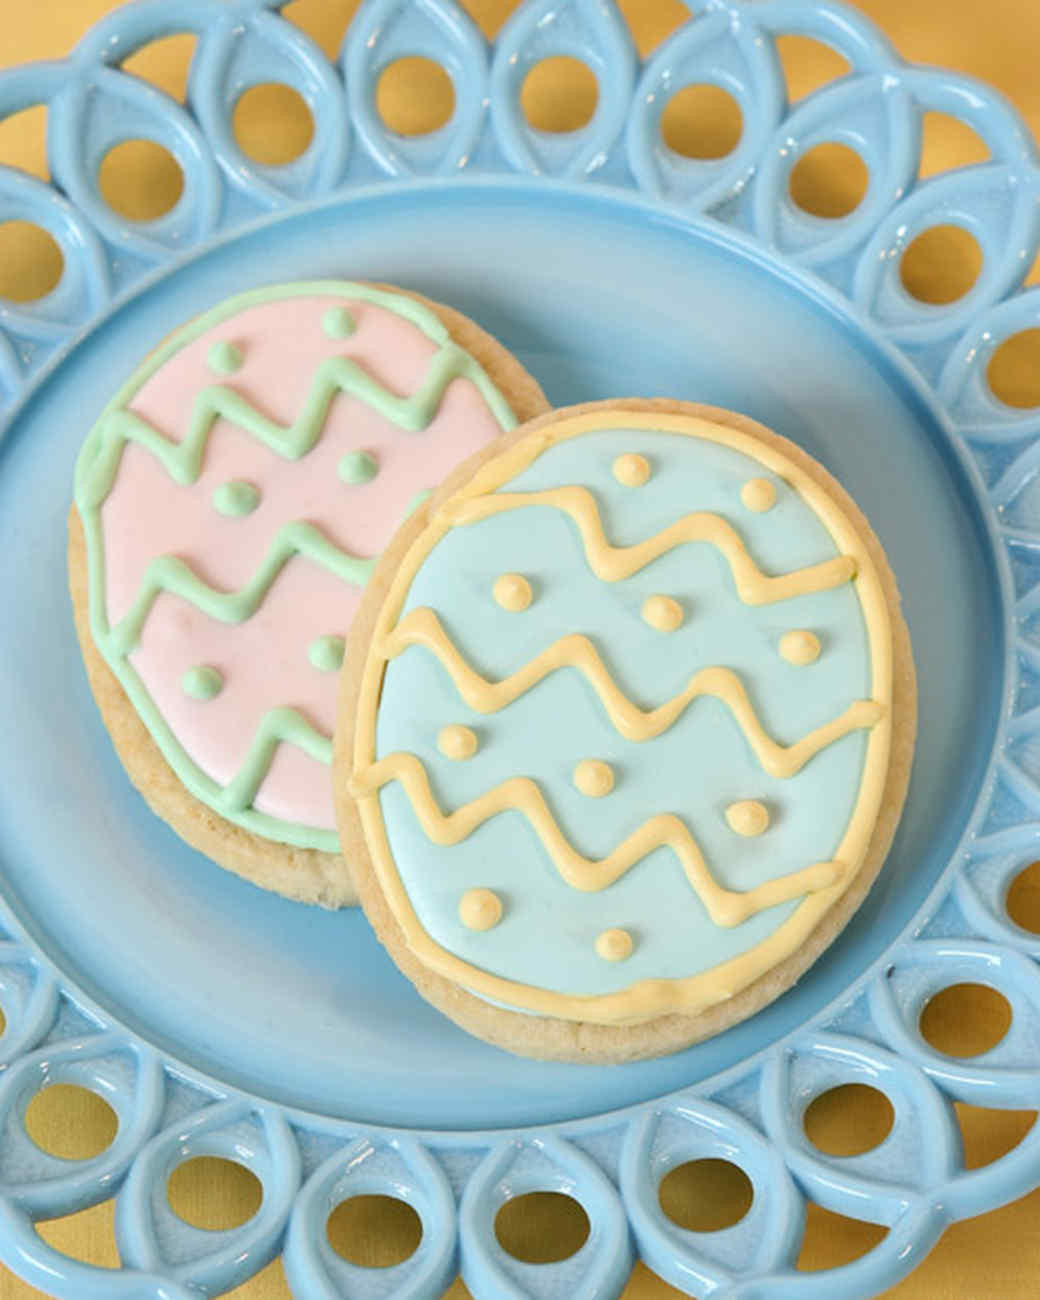 Royal Icing Recipe For Cookies
 Ideal Sugar Cookies Recipe & Video